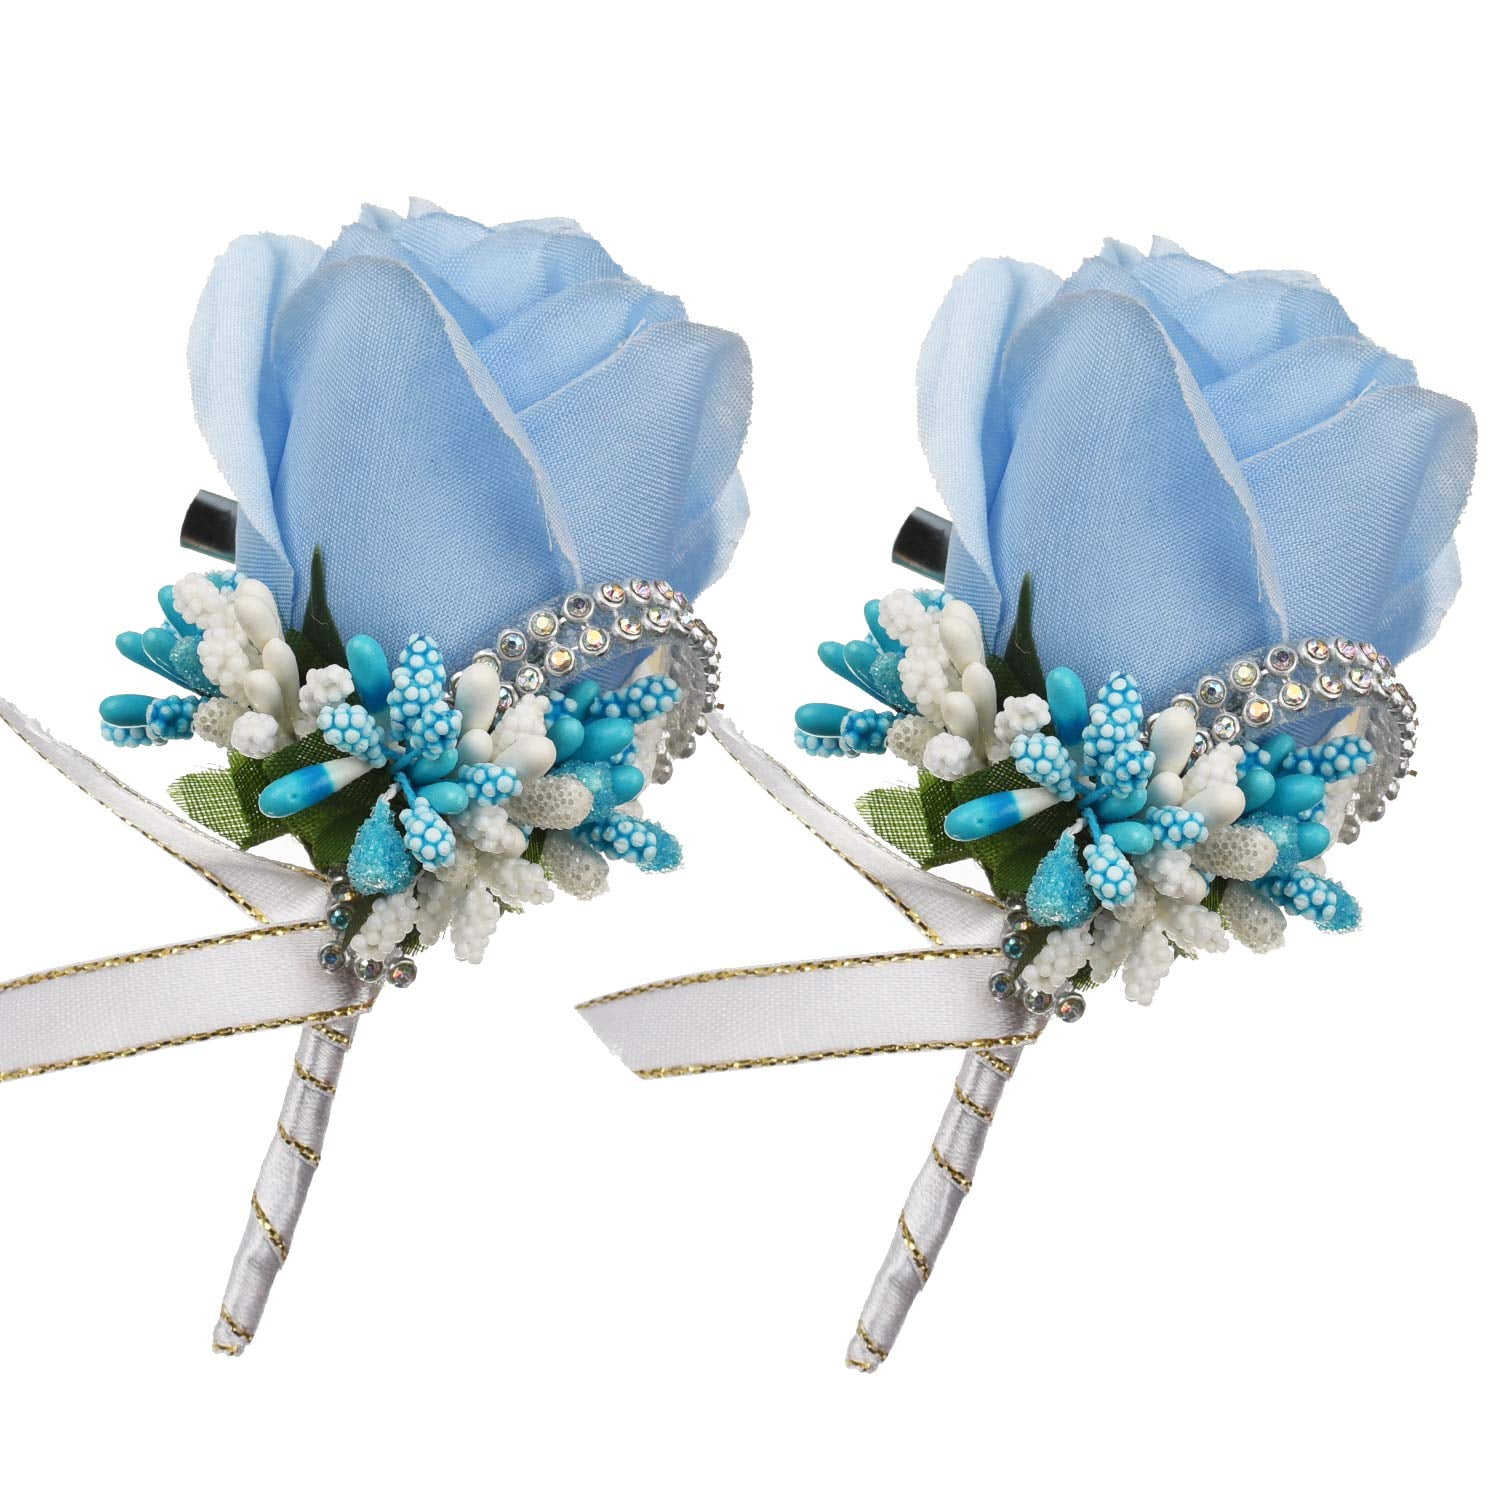 Ivory Royal Blue Corsage and boutonniere set Prom Wedding Formal Artificial 